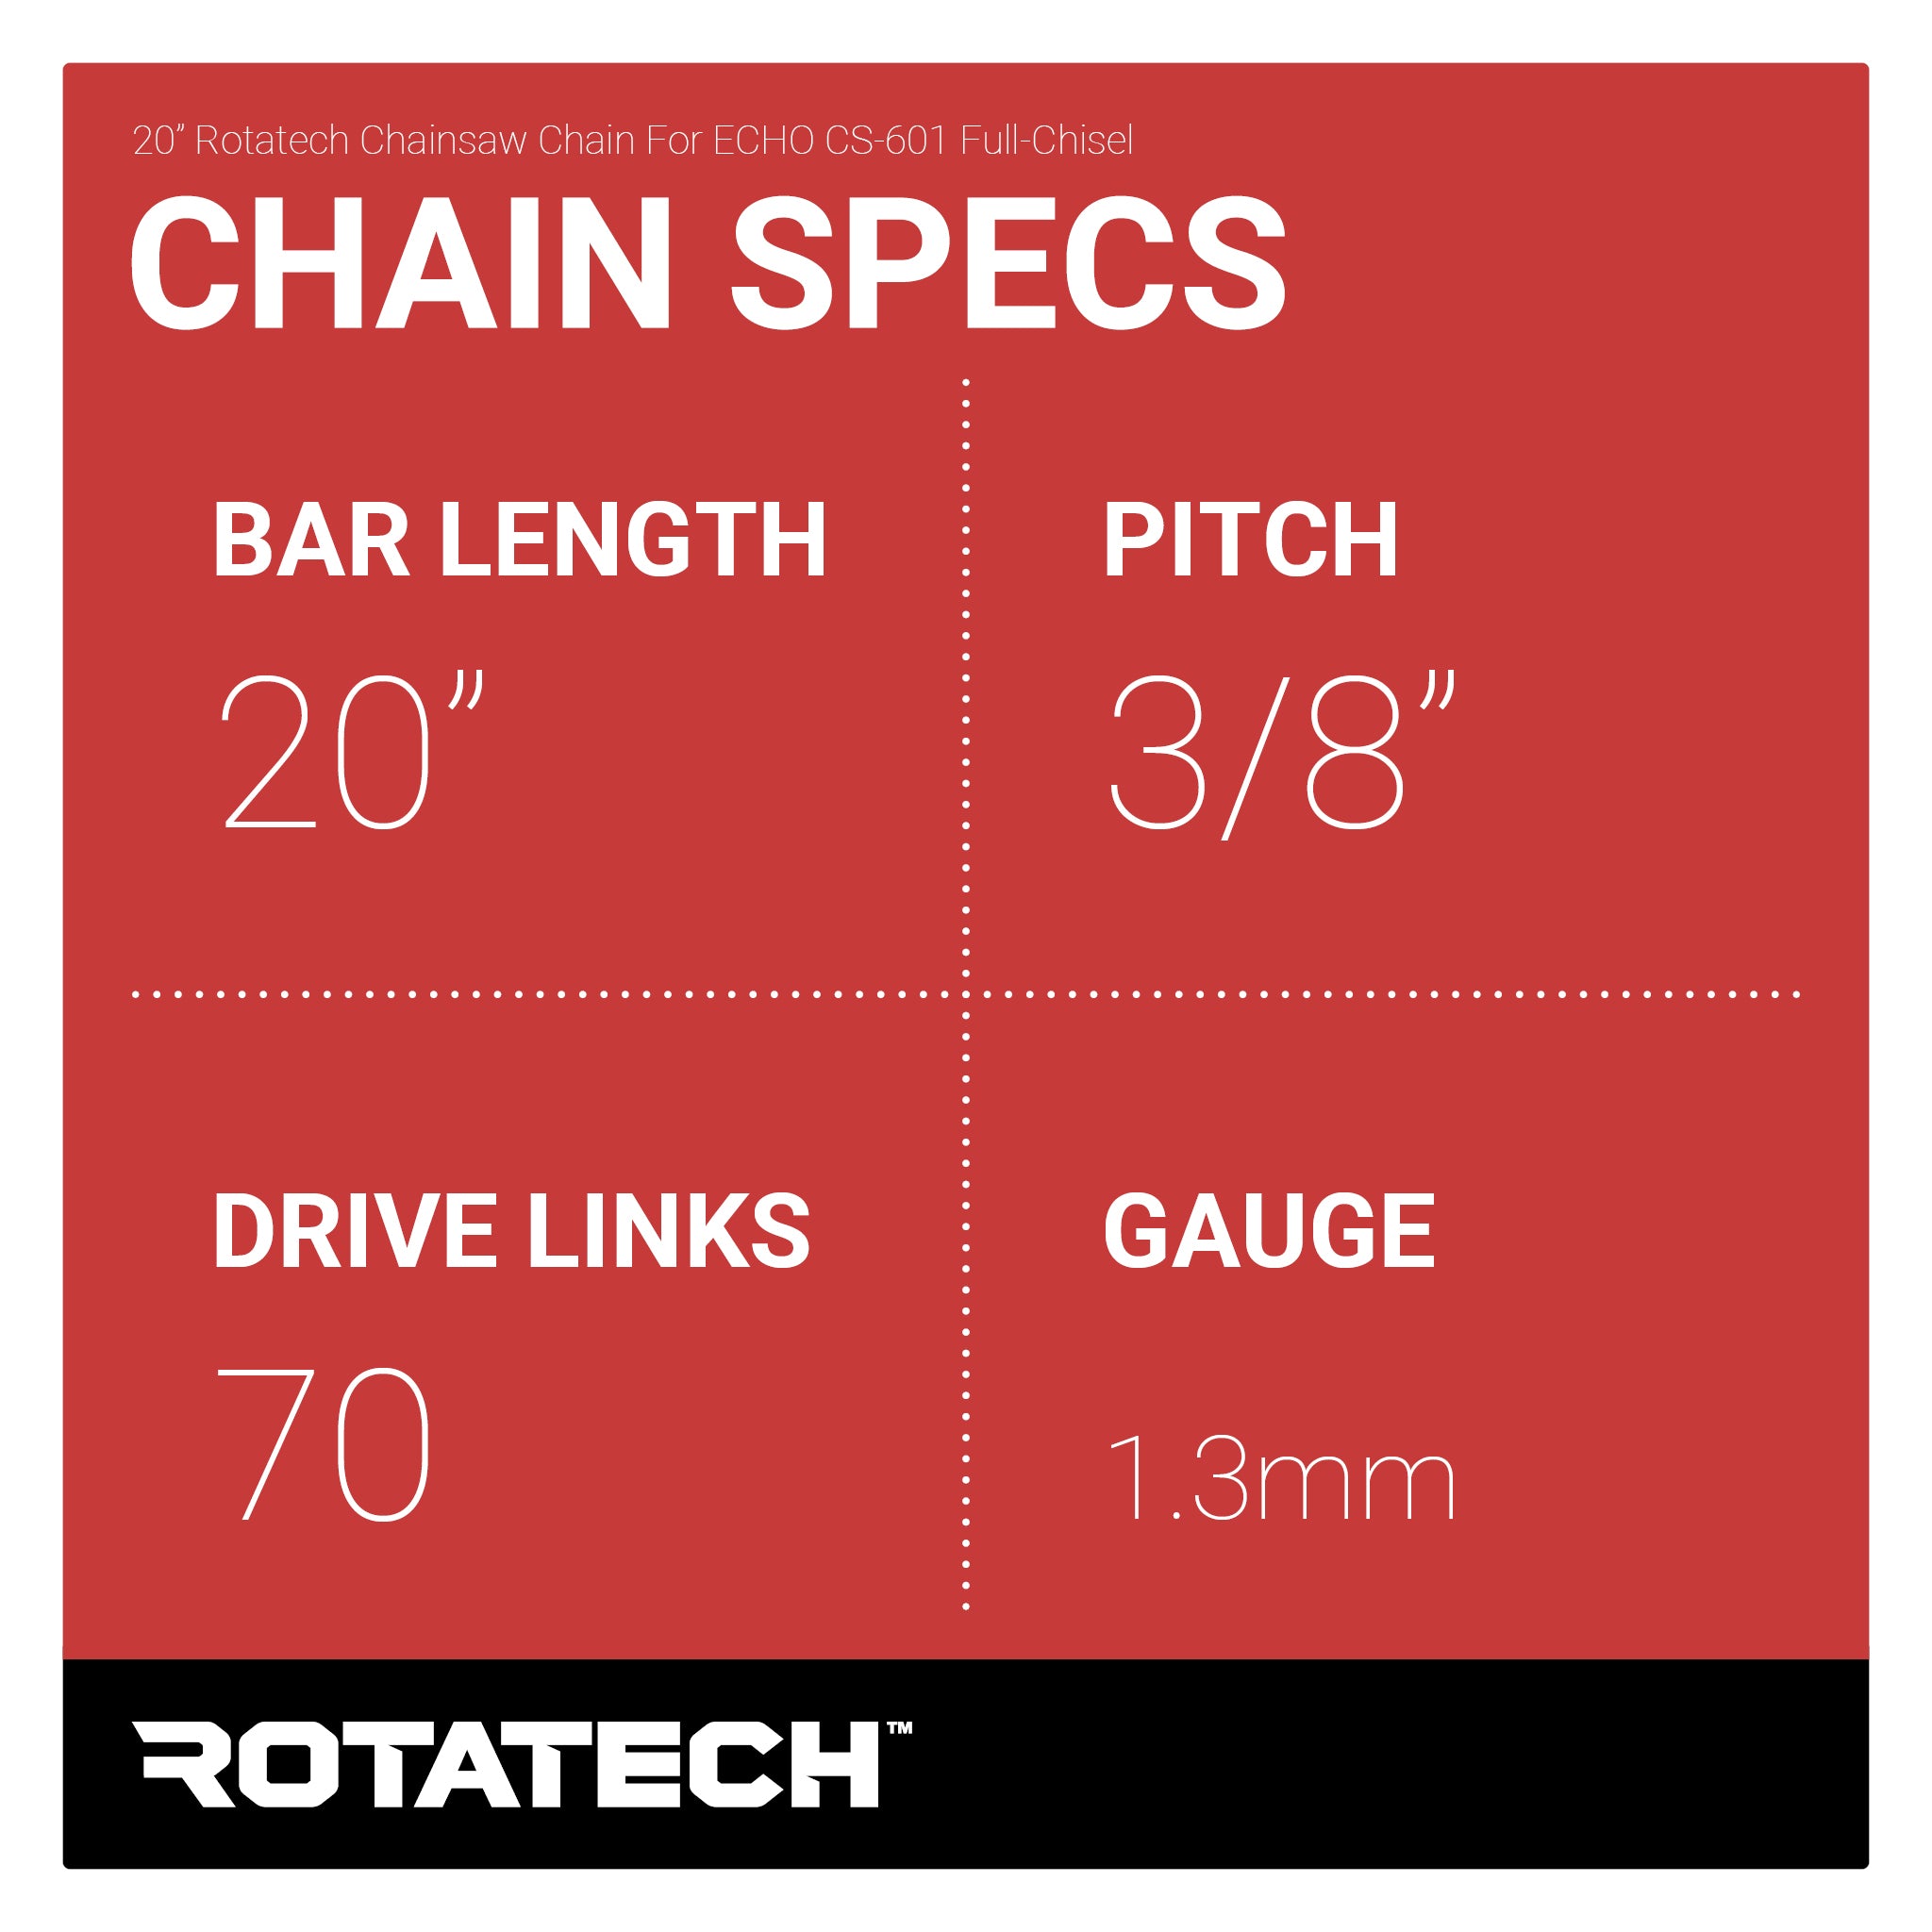 20" Rotatech Chainsaw Chain For ECHO CS-601 Full-Chisel Chain Specs